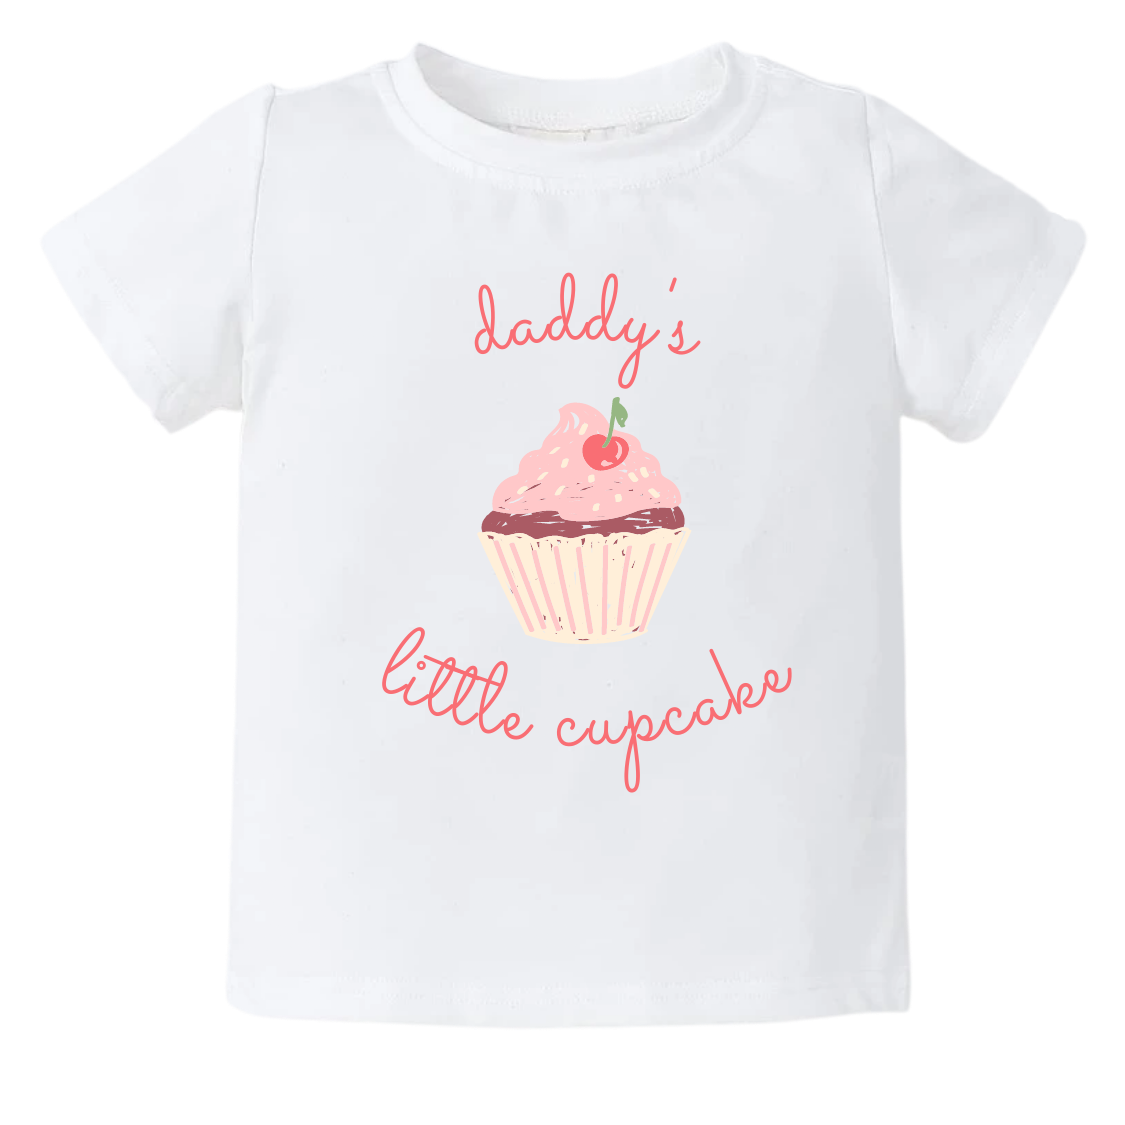 Cute cupcake graphic print with customizable text - 'Daddy's Little Cupcake' on a kid t-shirt and baby onesie. High-quality and vibrant design for adorable children's clothing. Perfect gift option.